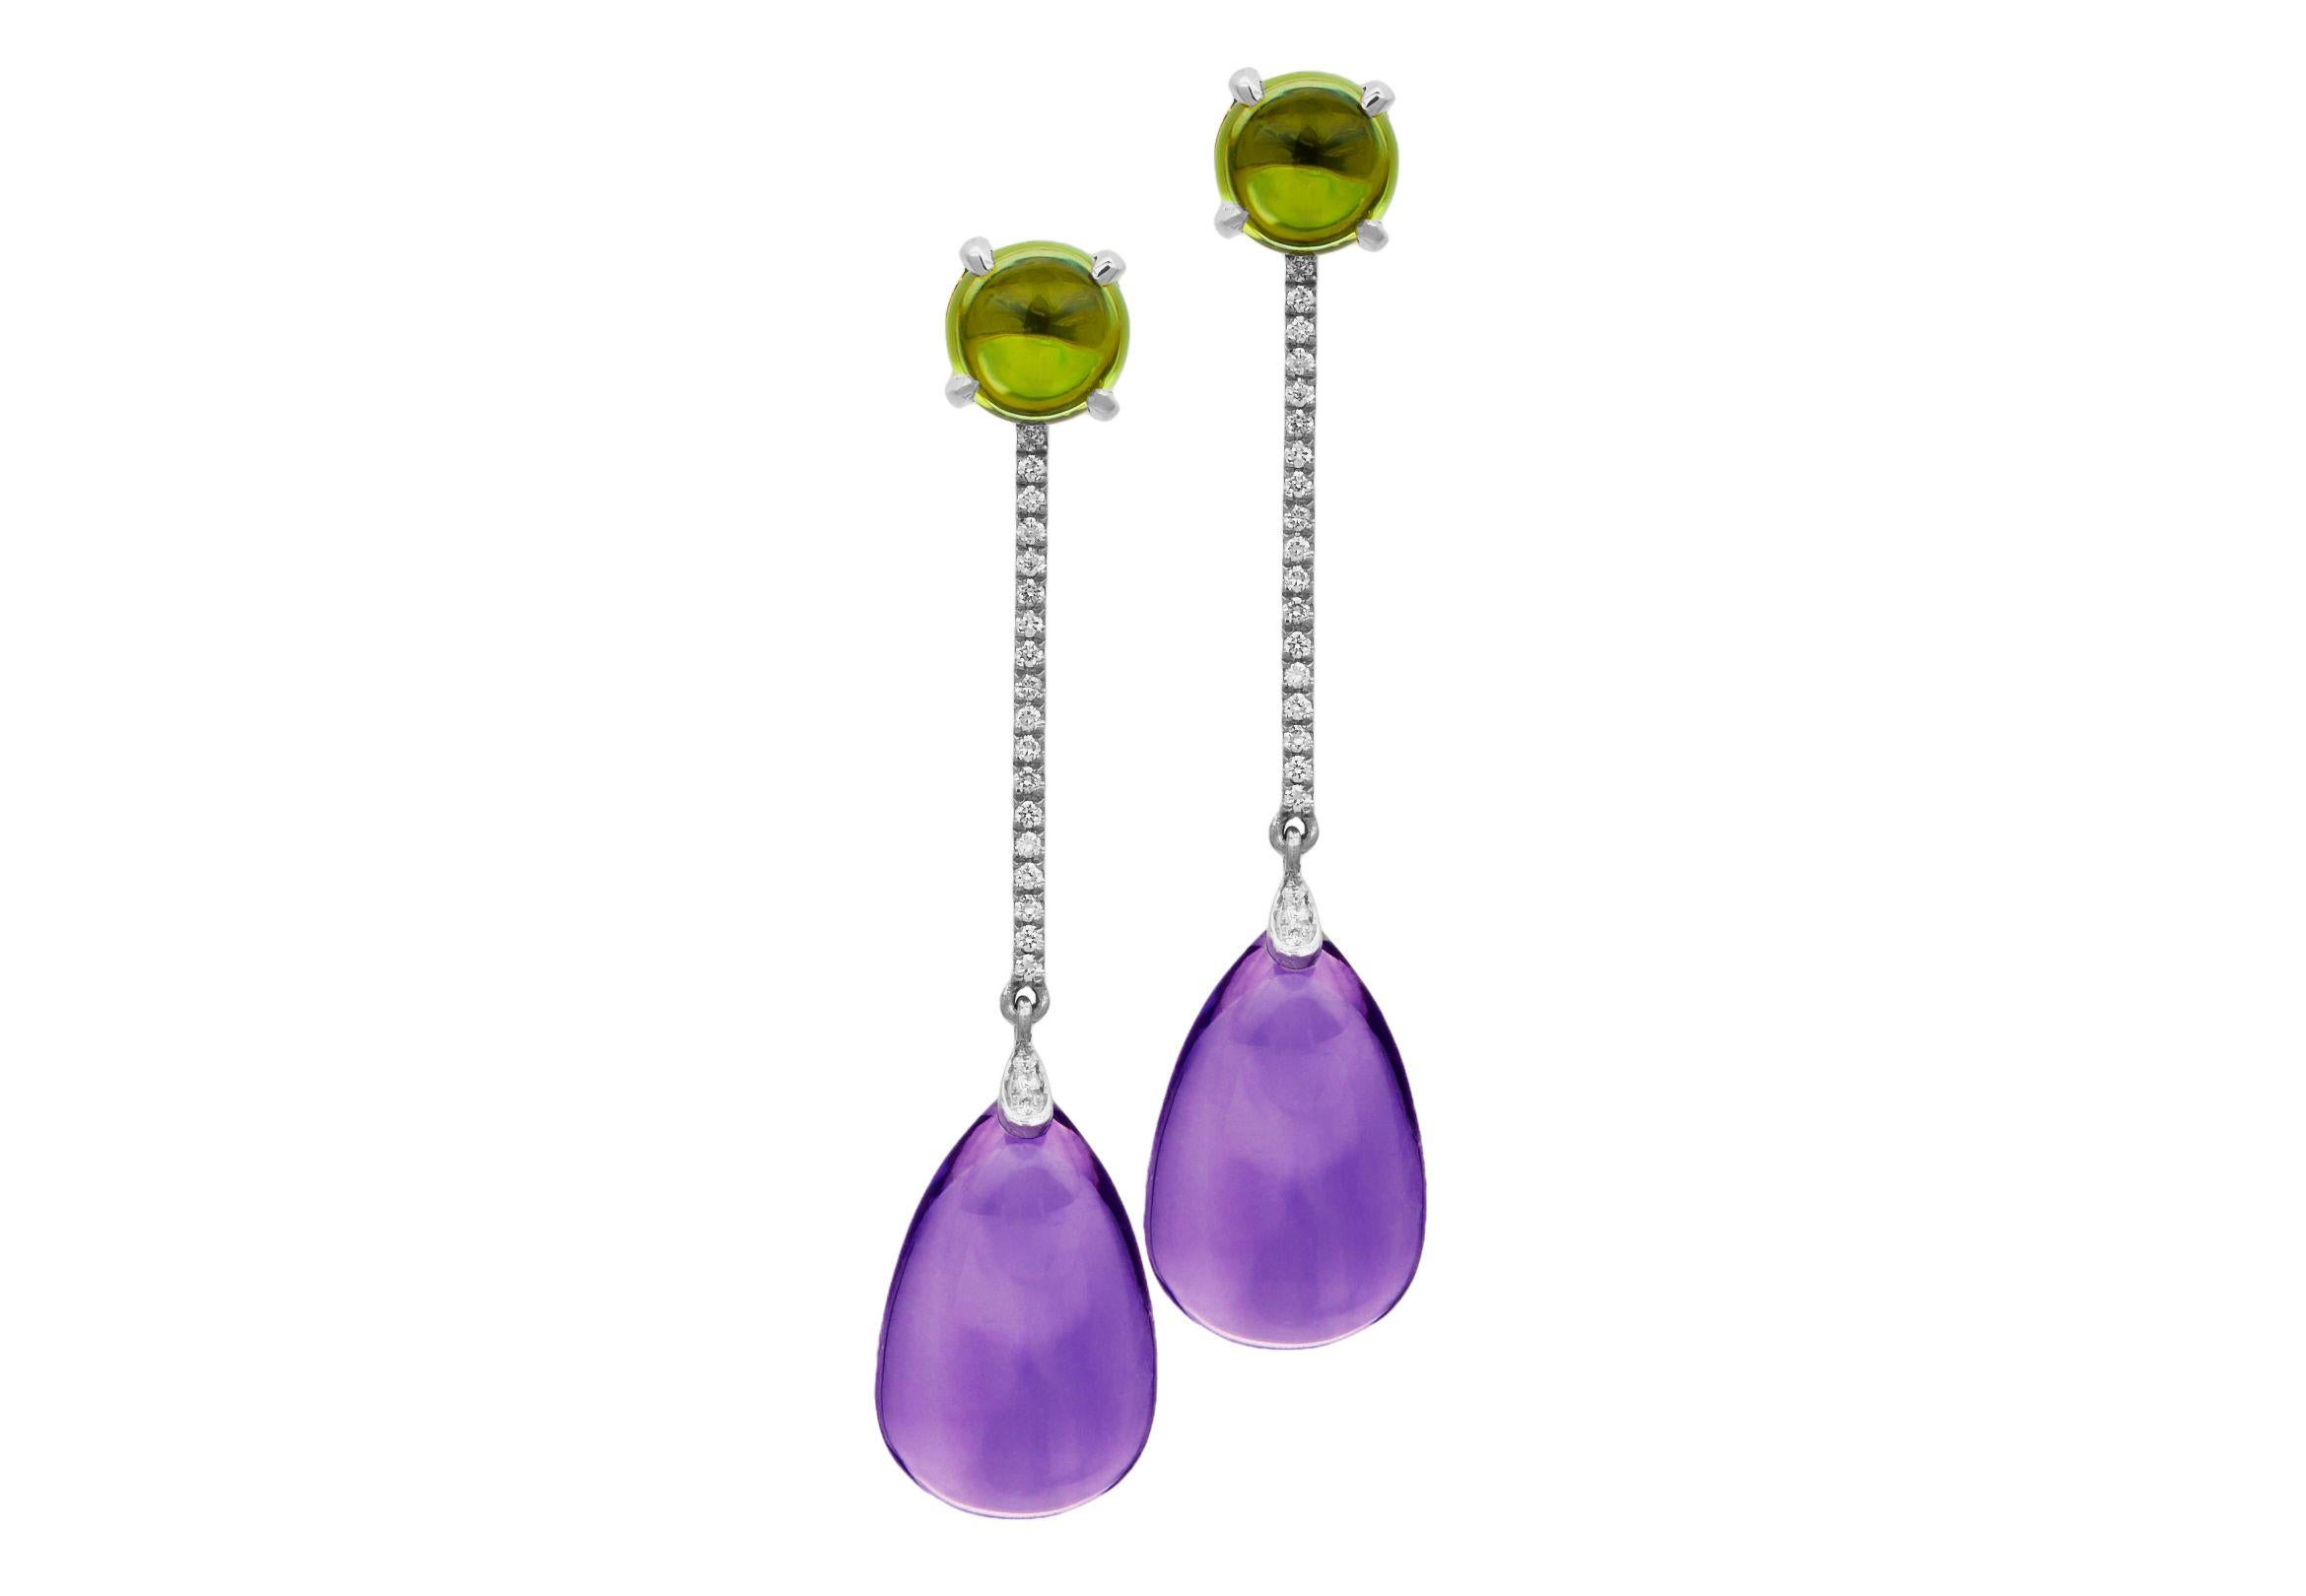 Amethyst & Peridot Long Drop Earrings with Diamonds in 18K from 'Naughty' Collection
 Stone Size: 19 x 12 mm & 8 mm 
 Diamonds: G-H / VS, Approx Wt: 0.28 Cts